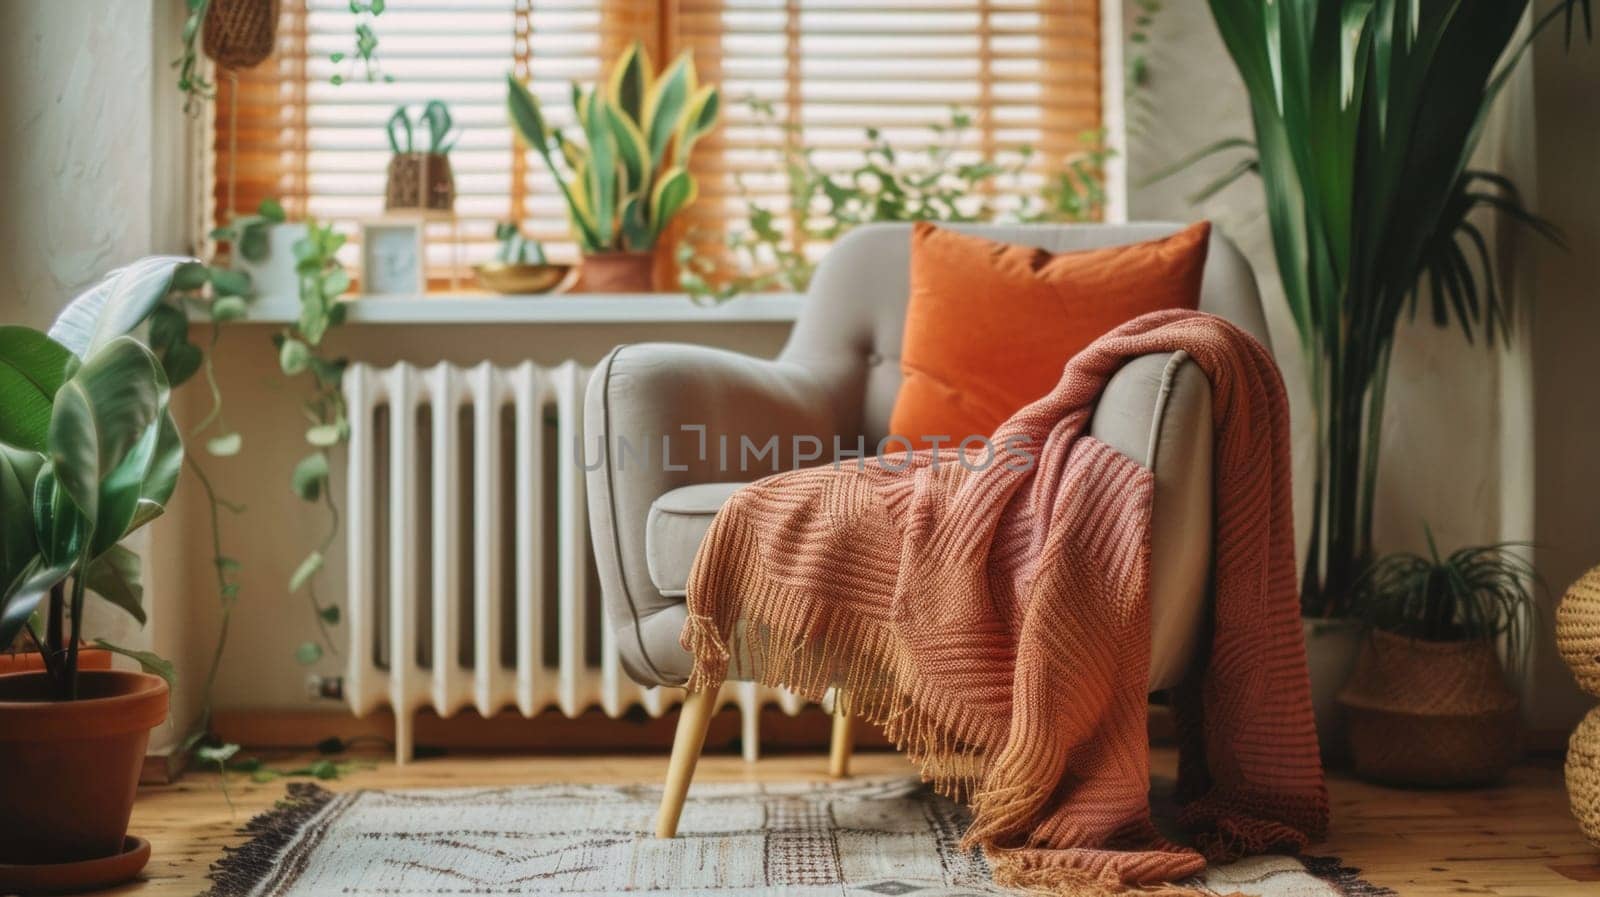 A chair with a blanket on it sitting in front of some plants